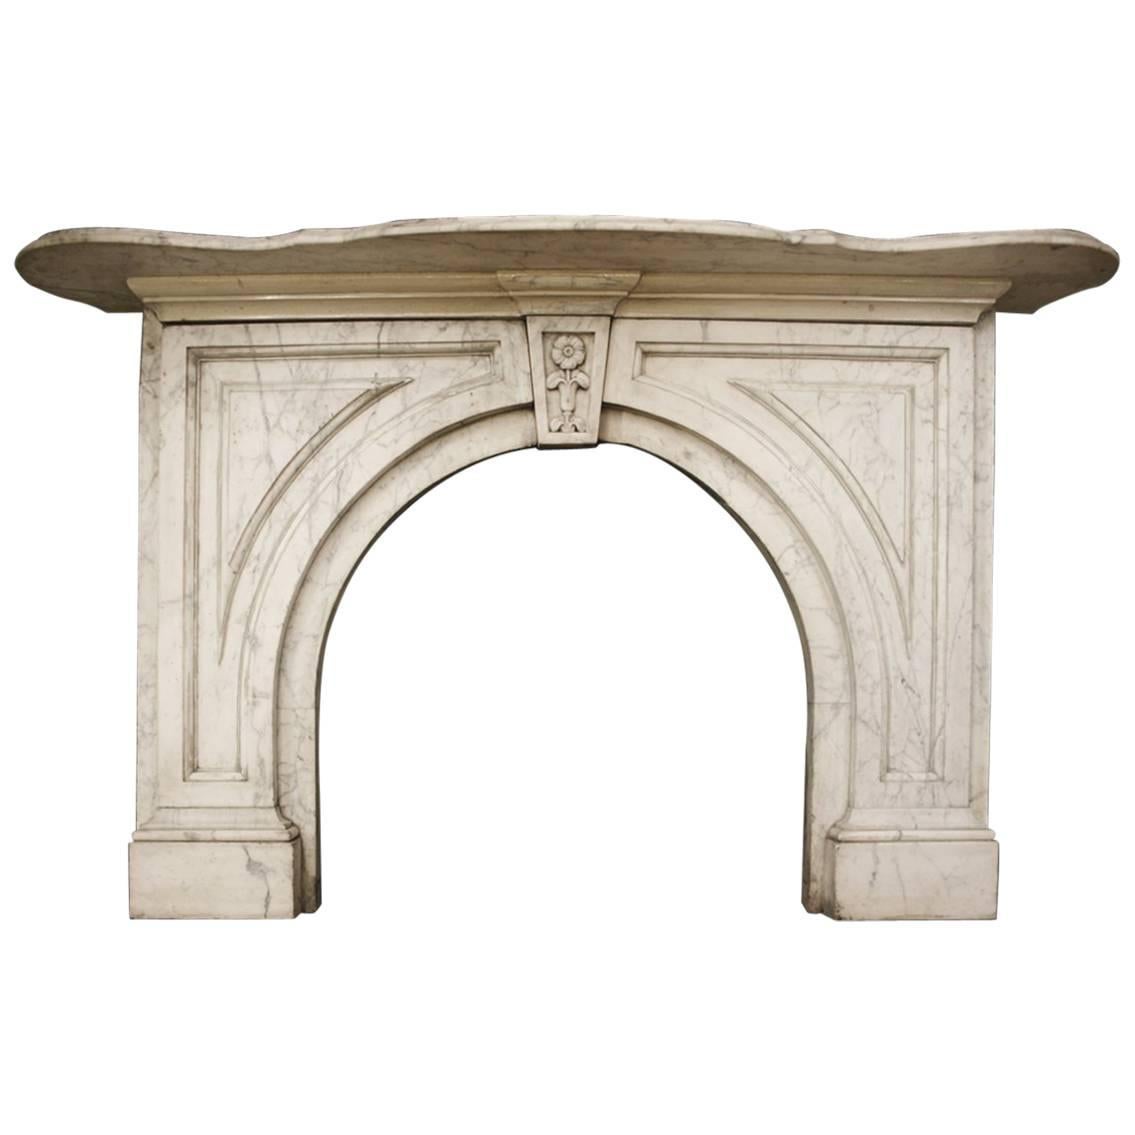 19th Century Mid-Victorian Arched Carrara Marble Fireplace Surround